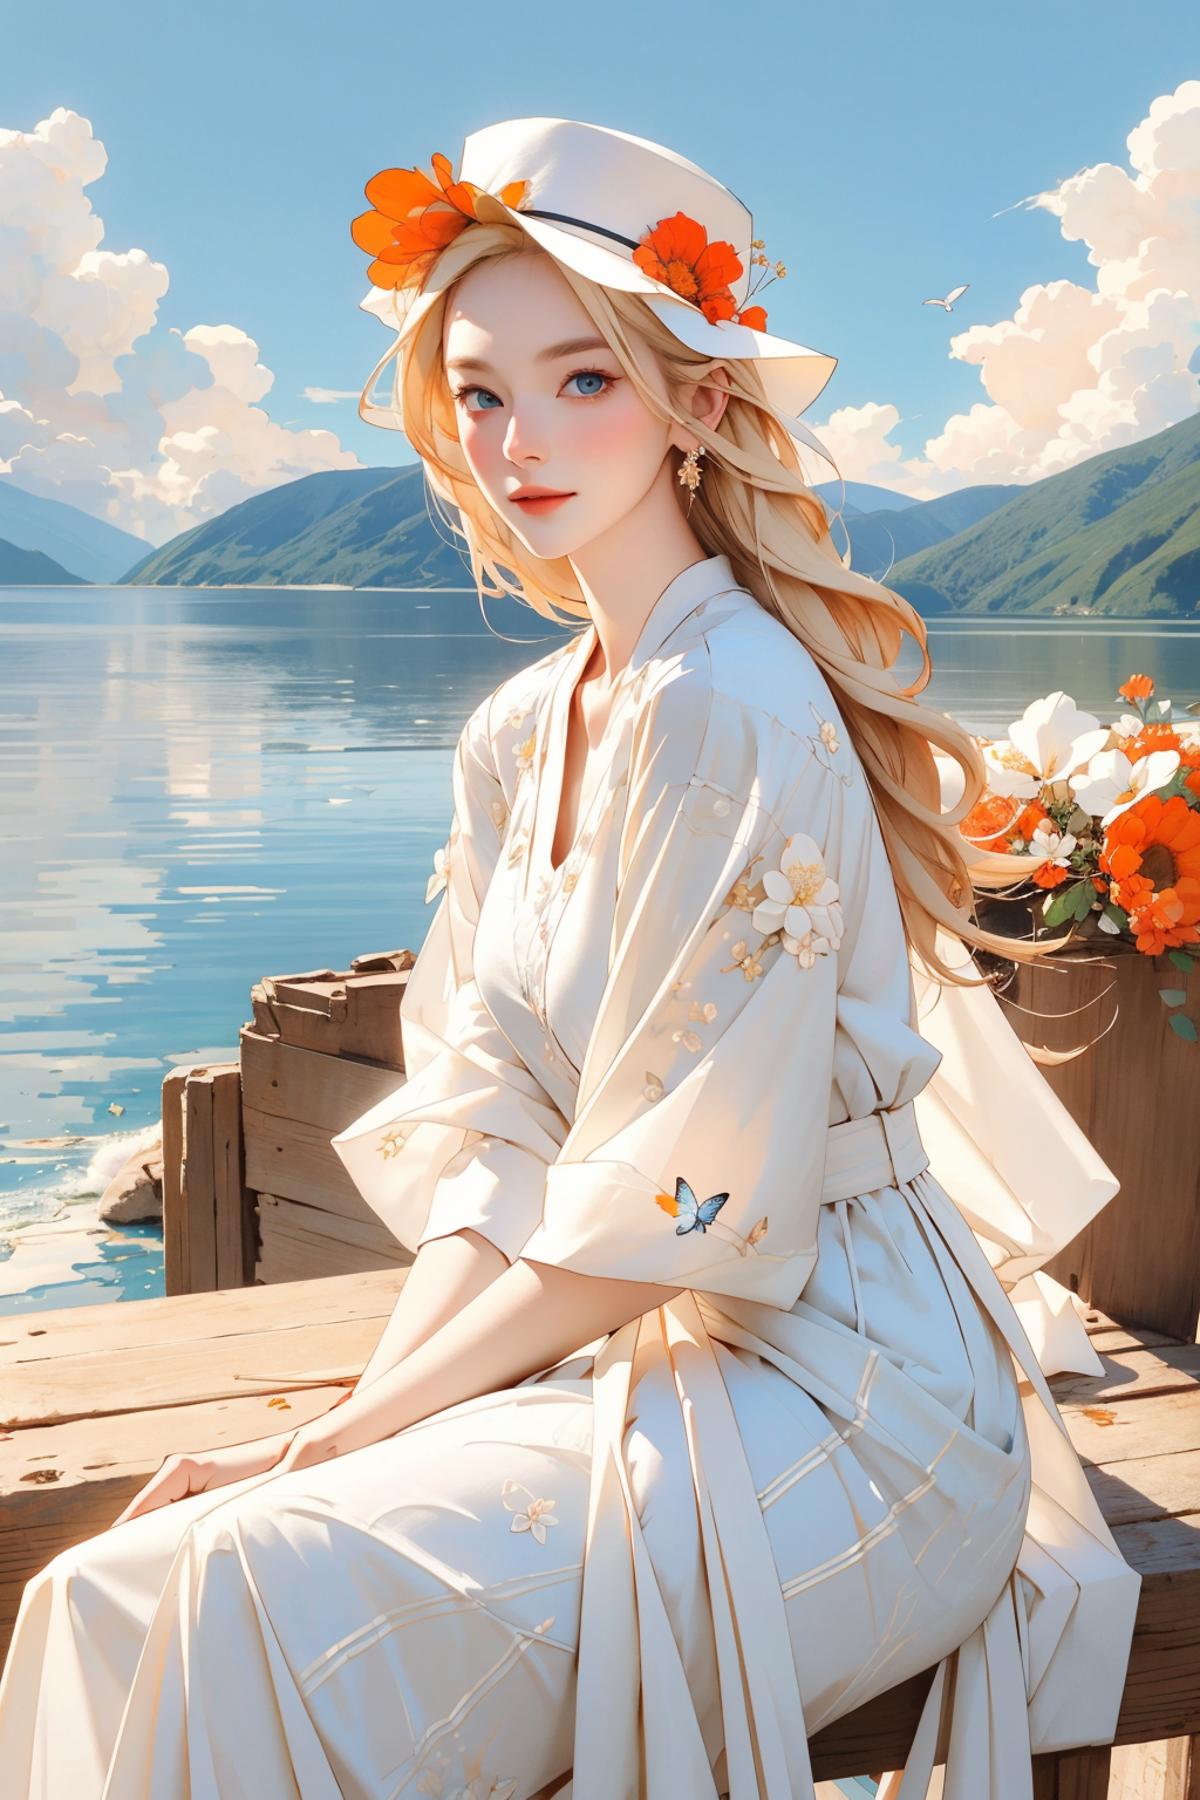 A beautiful woman wearing a white dress with a butterfly design, sitting on a wooden dock near a lake.